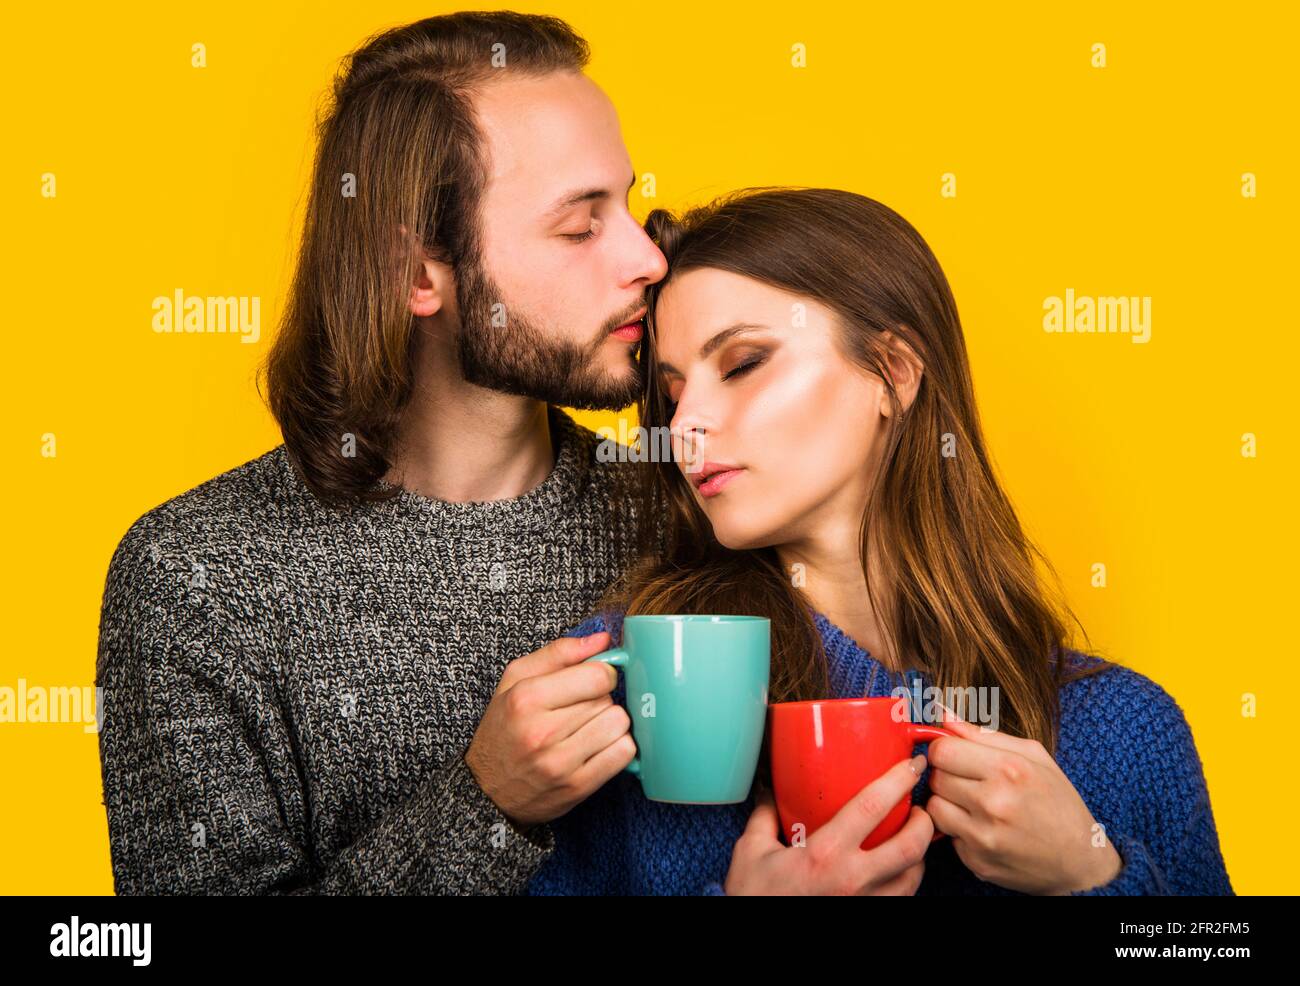 Family coziness concept. Couple in warm clothes with Cup of tea or coffee. Romantic moments. Stock Photo